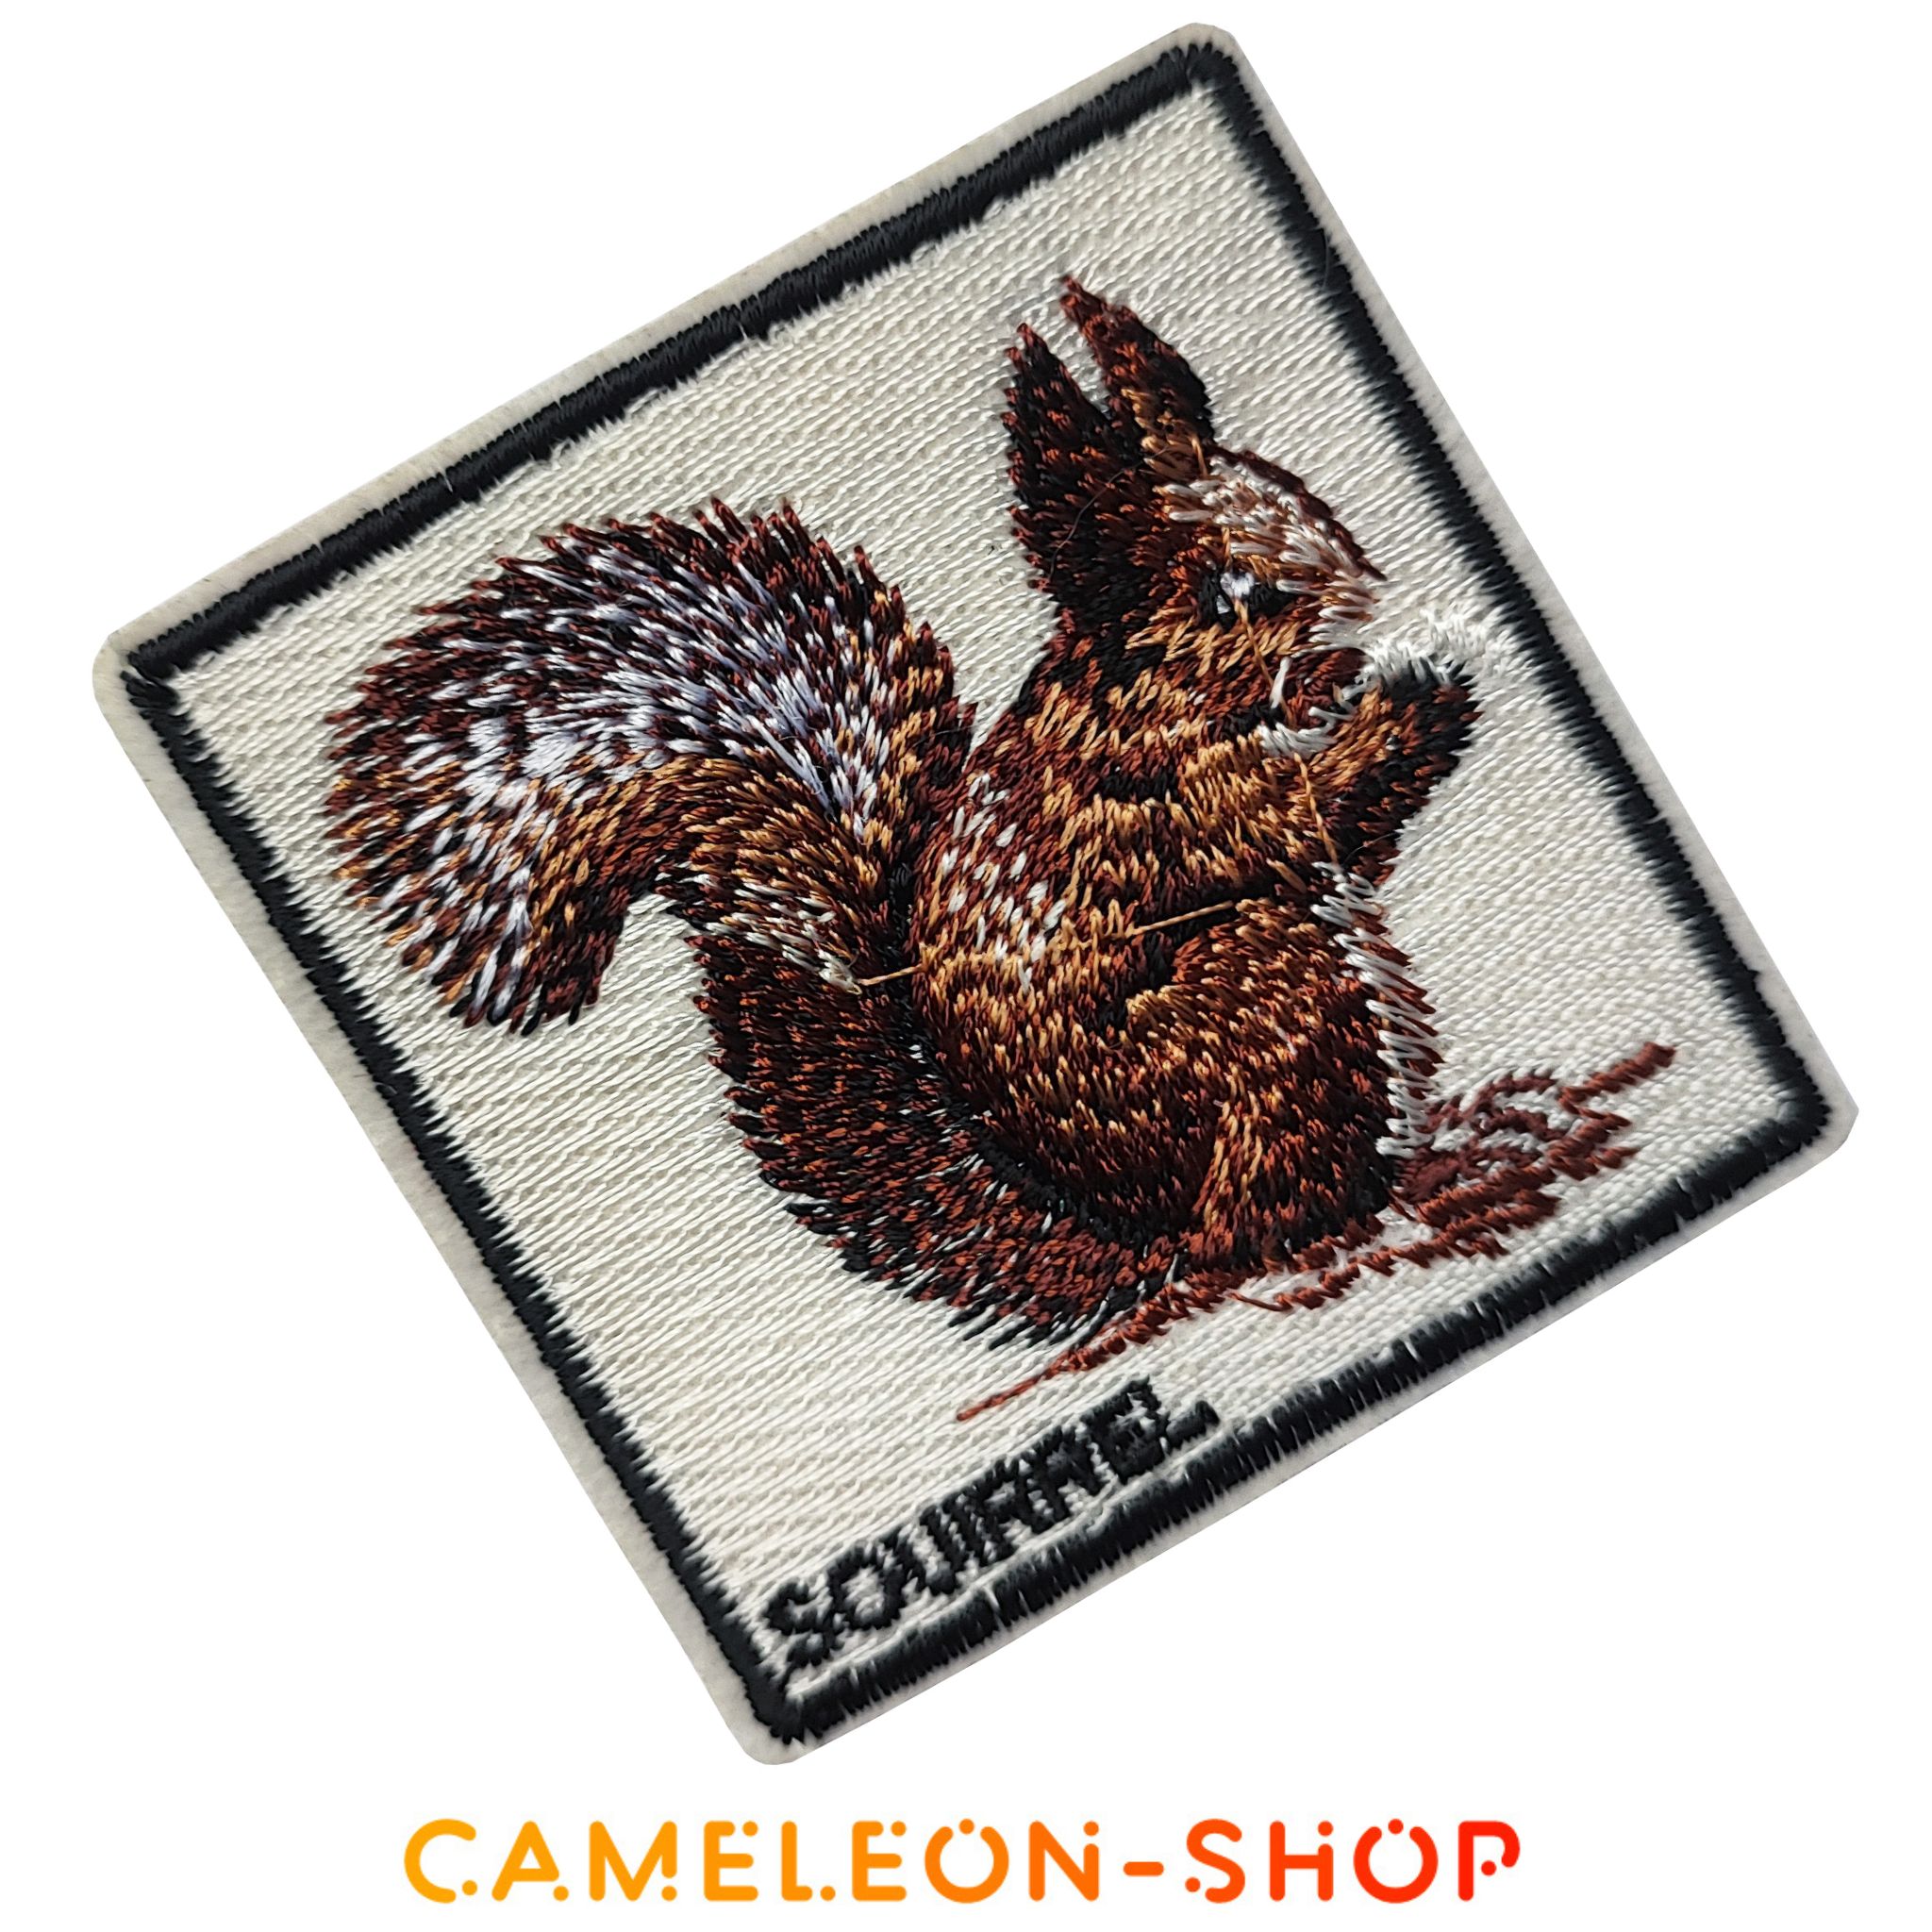 PAT1284 - Patch thermocollant animal ecureuil thermocollant 3